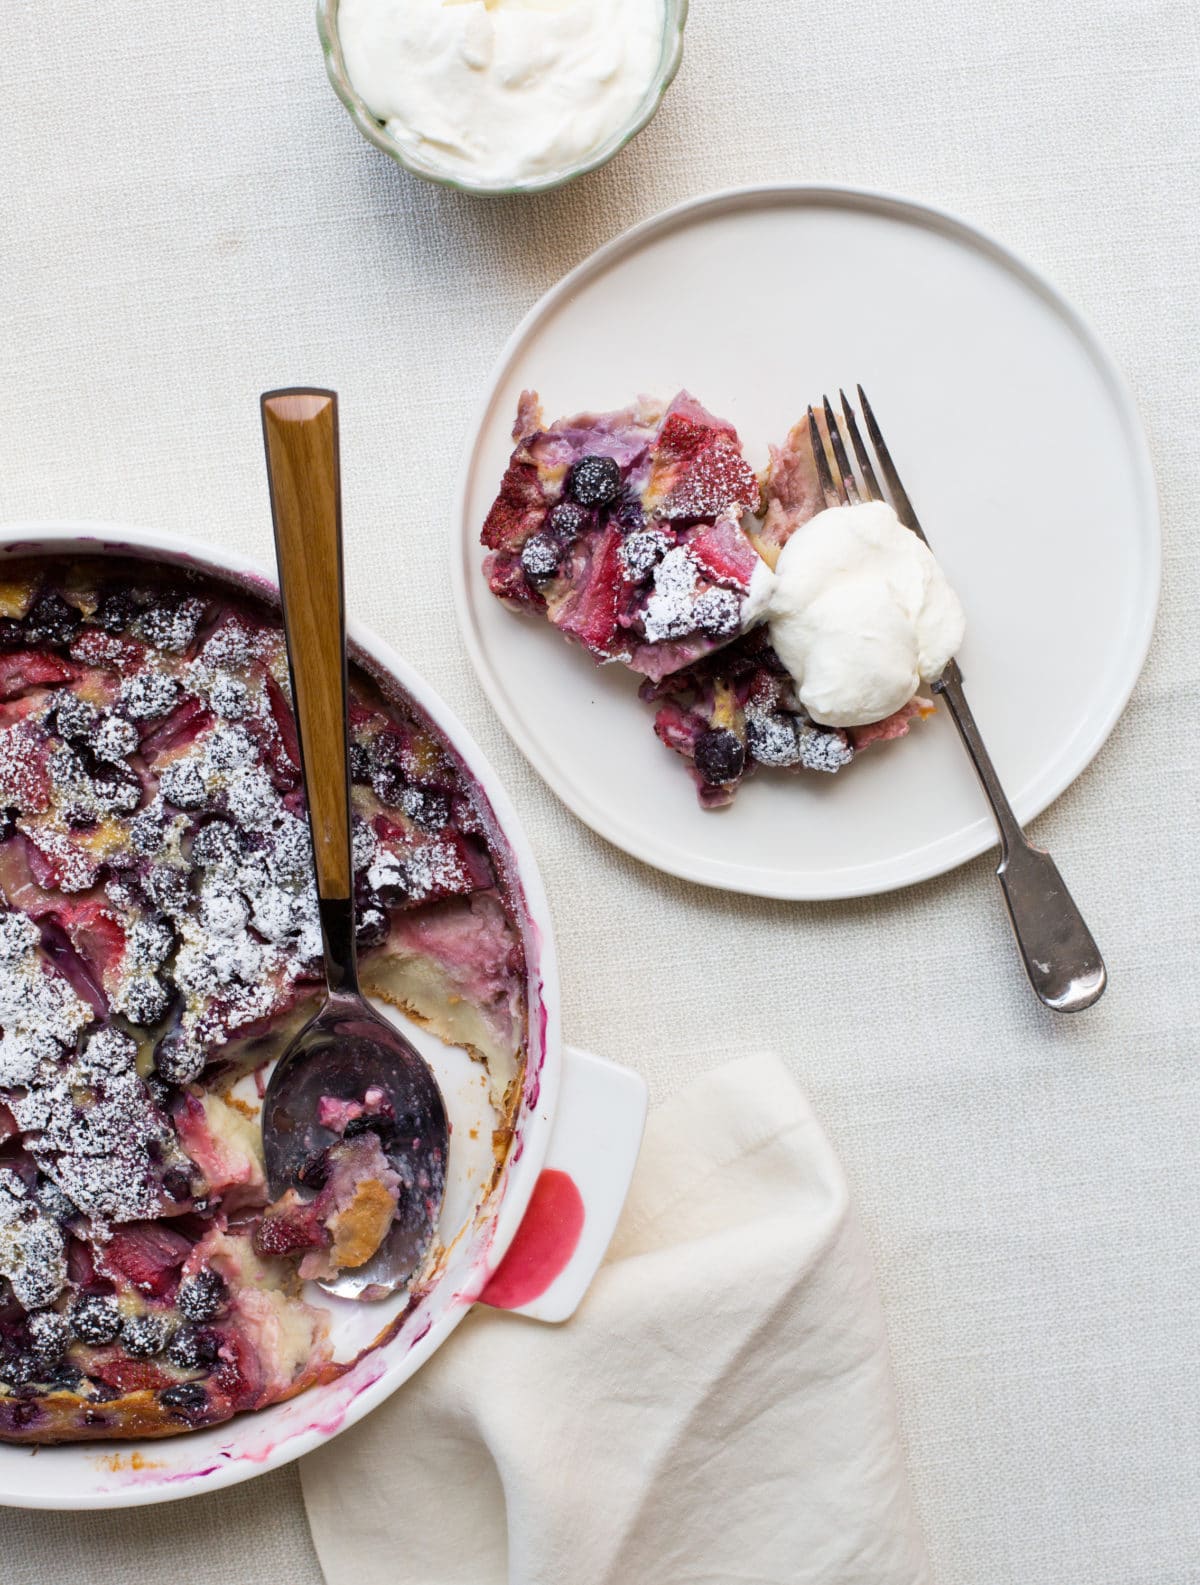 Plate with a piece of Summer Berry Clafoutis with Whipped Cream.